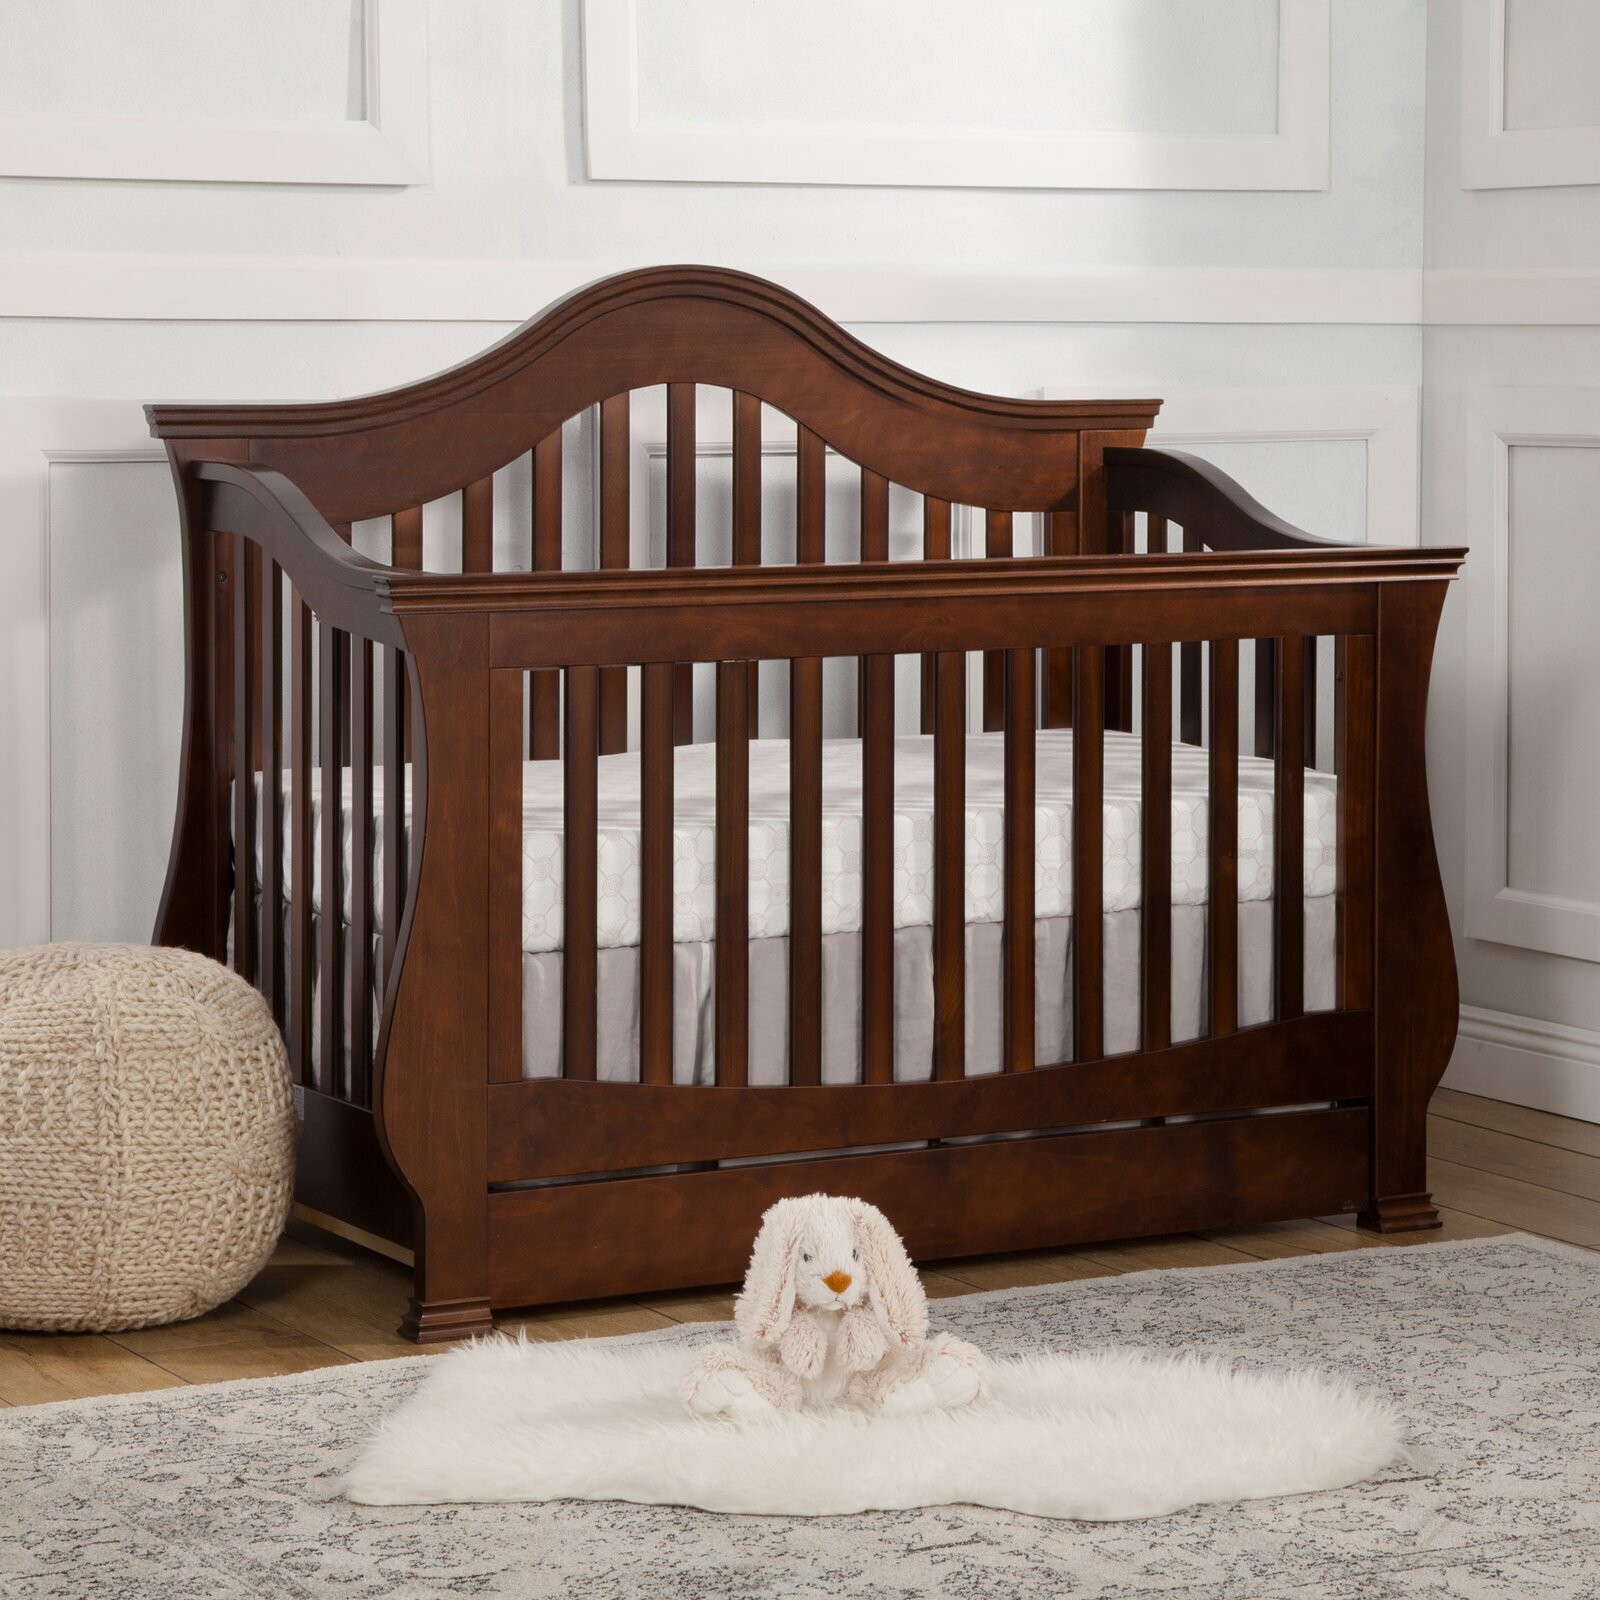 Crib with Arched Design